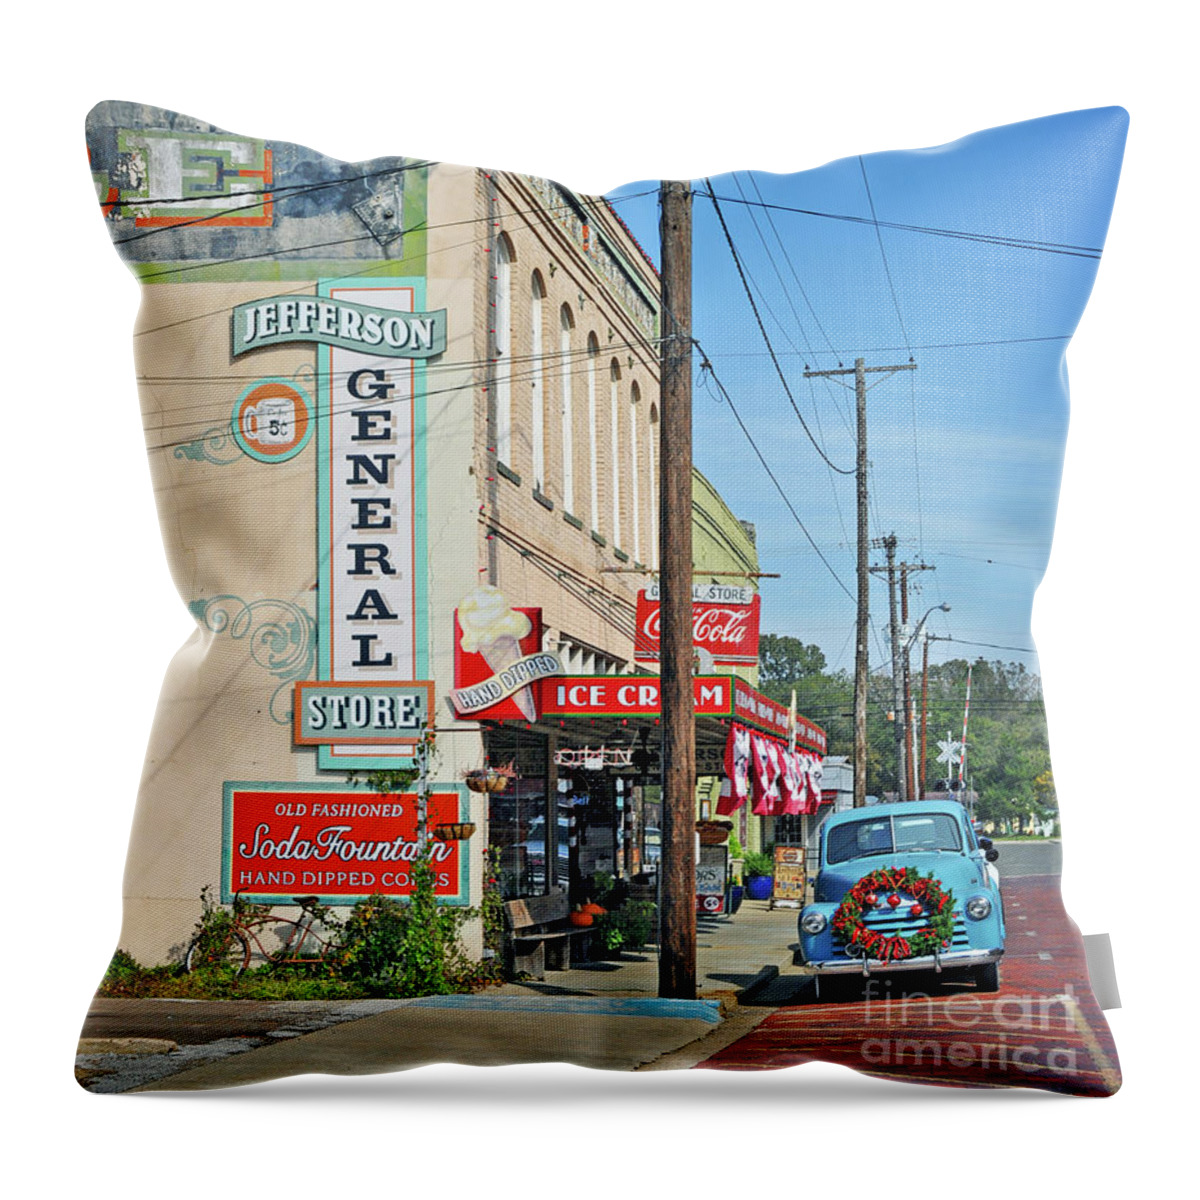 Texas Throw Pillow featuring the photograph Texas Forgotten - Jefferson Gerneral Store by Chris Andruskiewicz